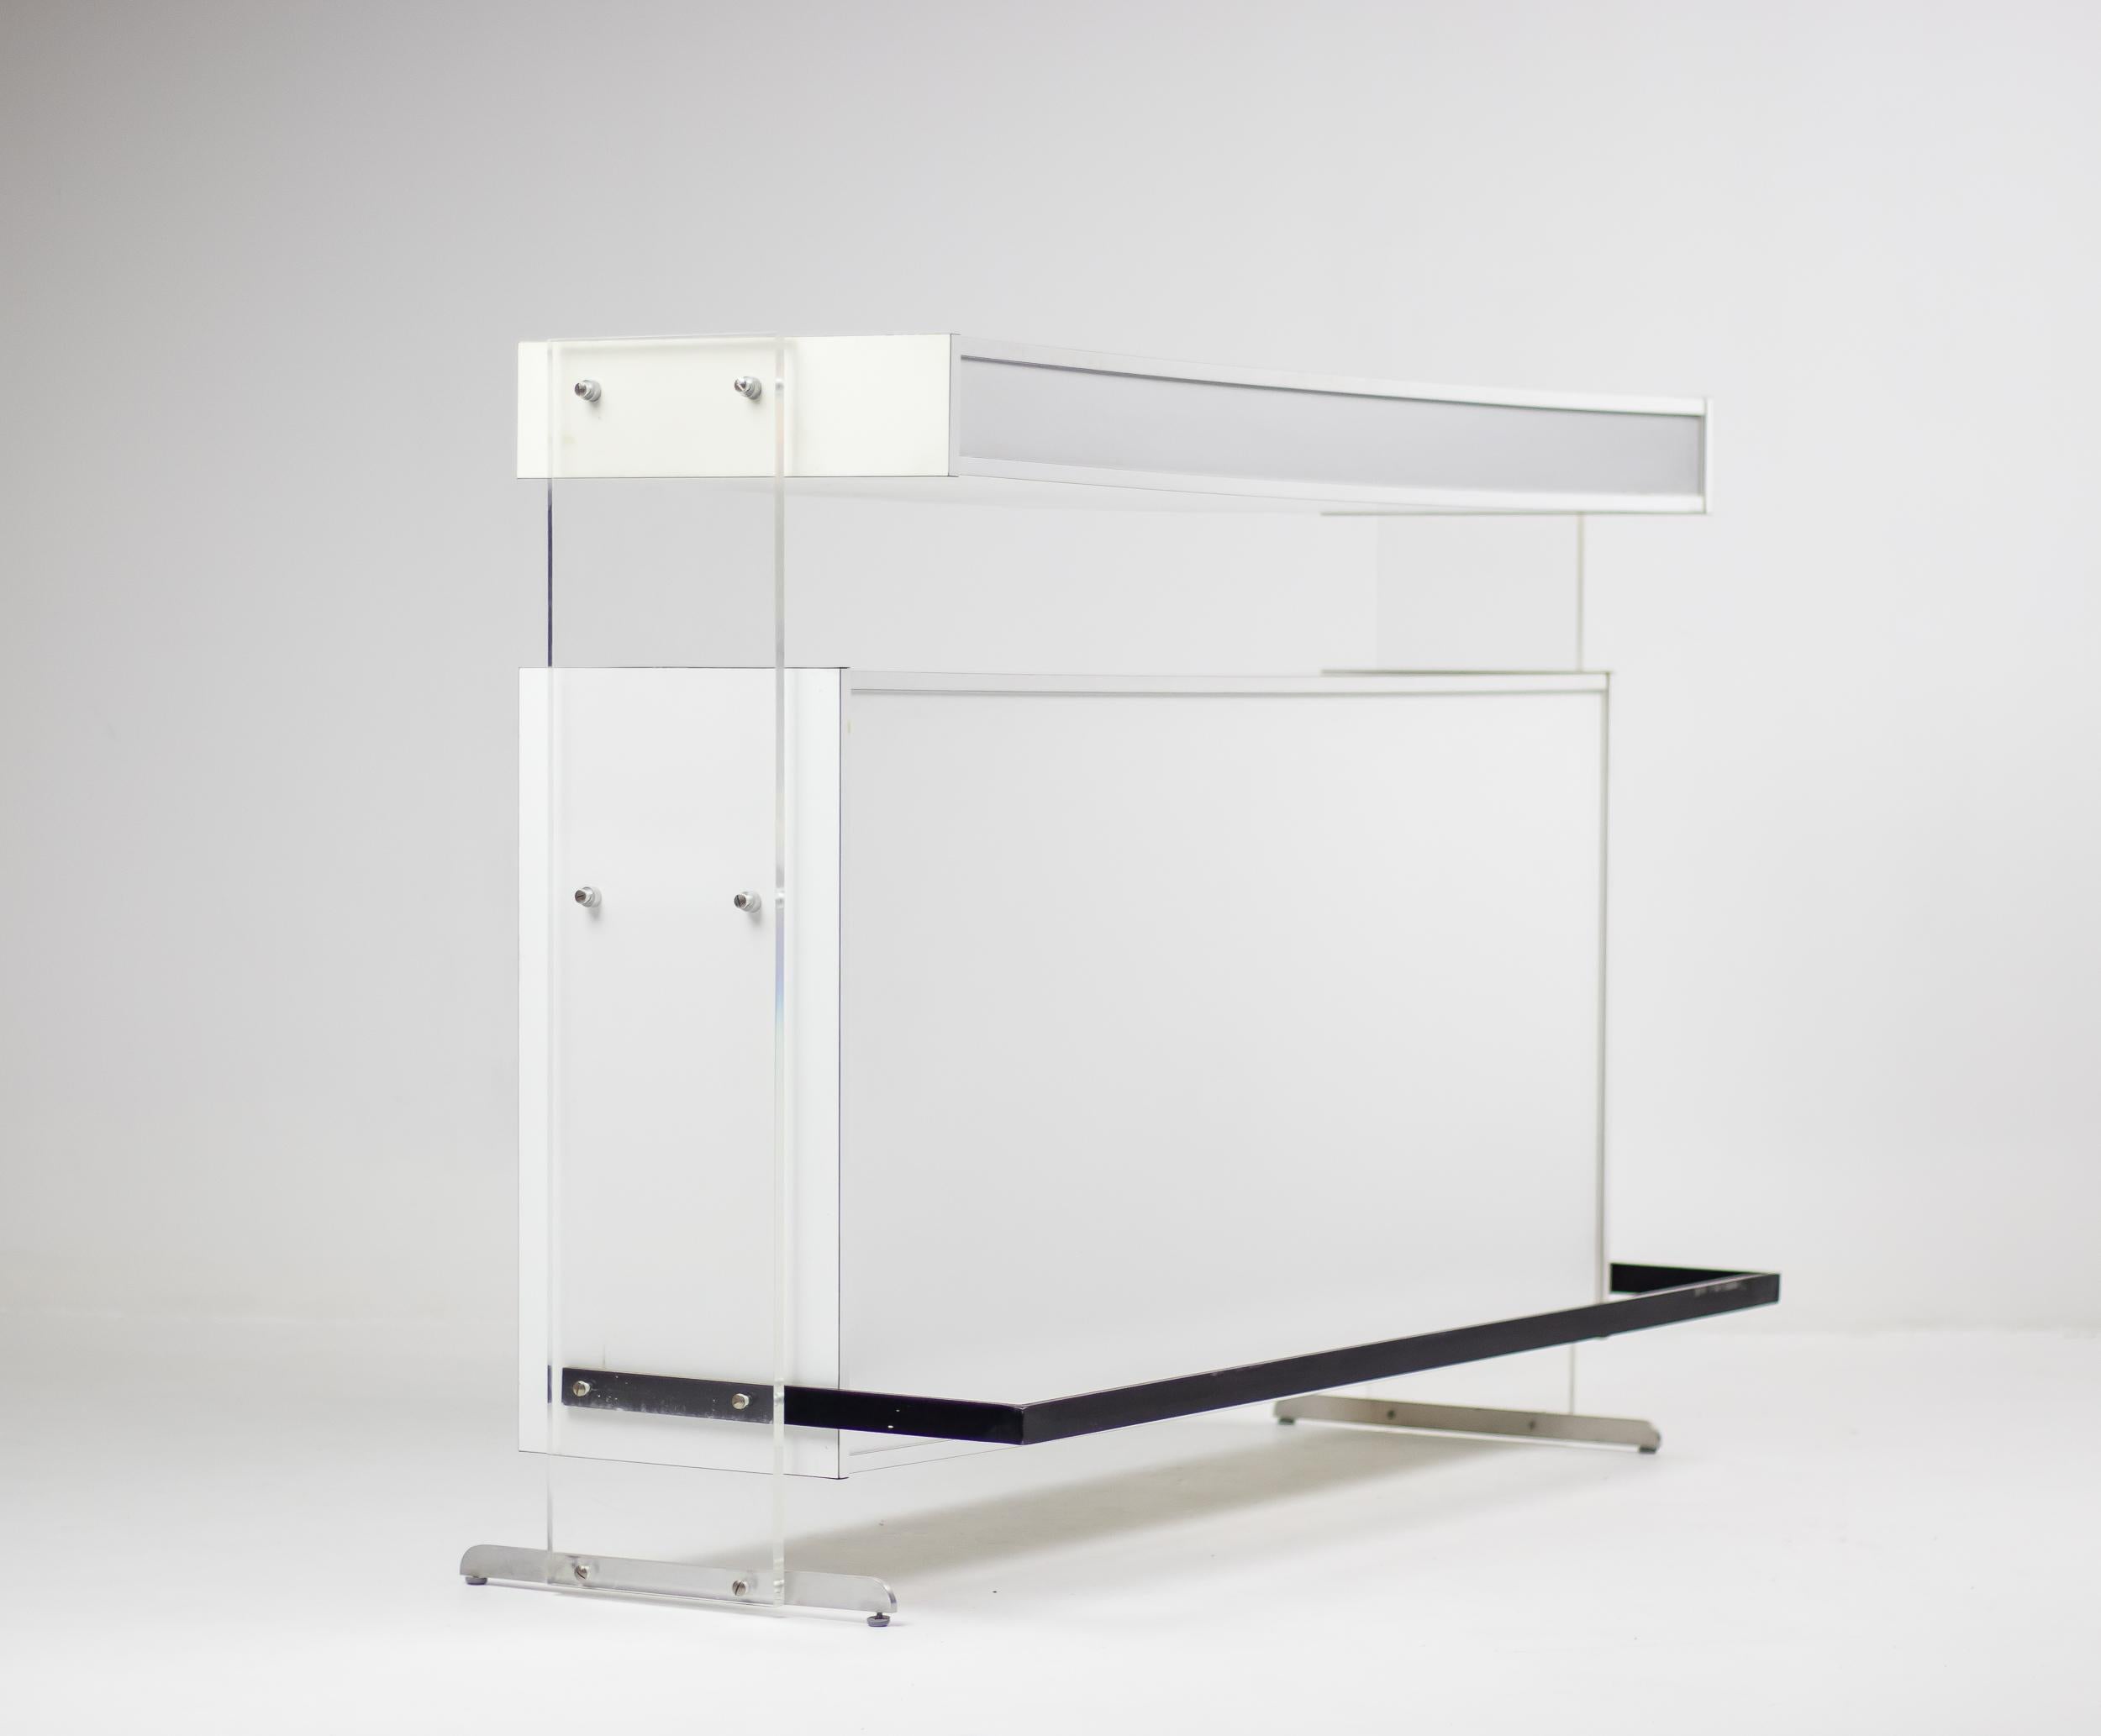 Architectural dry bar designed by Poul Nørreklit in 1969 and made by Georg Petersens Møbelfabrik. 
Made in white and silver laminate with acrylic supports on aluminium legs. Great futuristic 